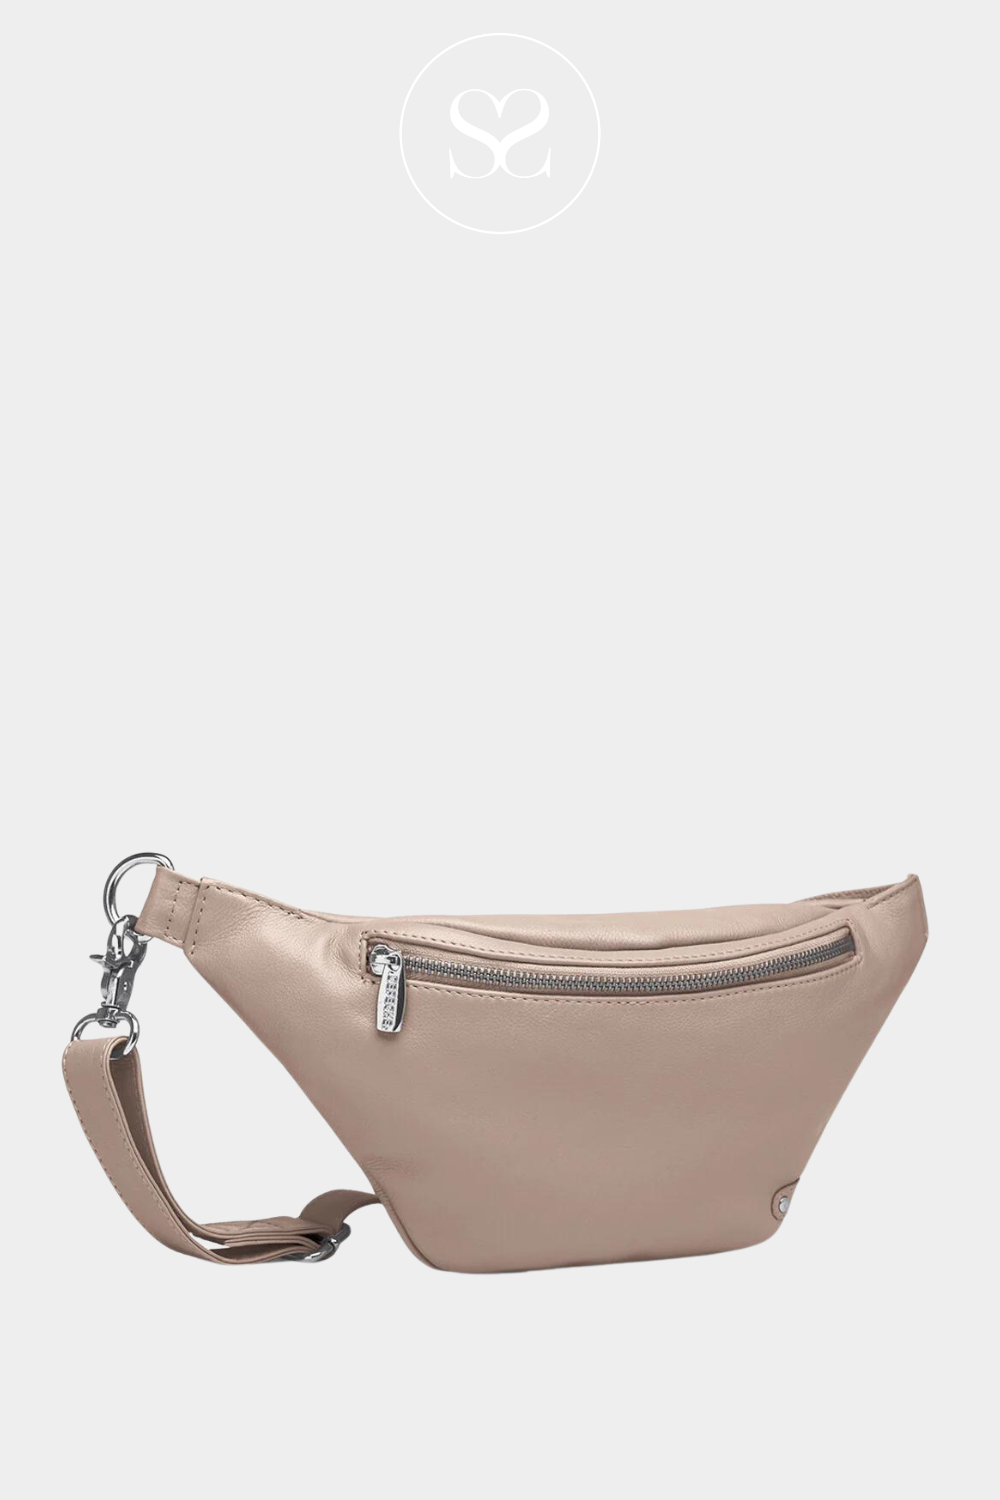 depeche 12556 taupe leather bum bag